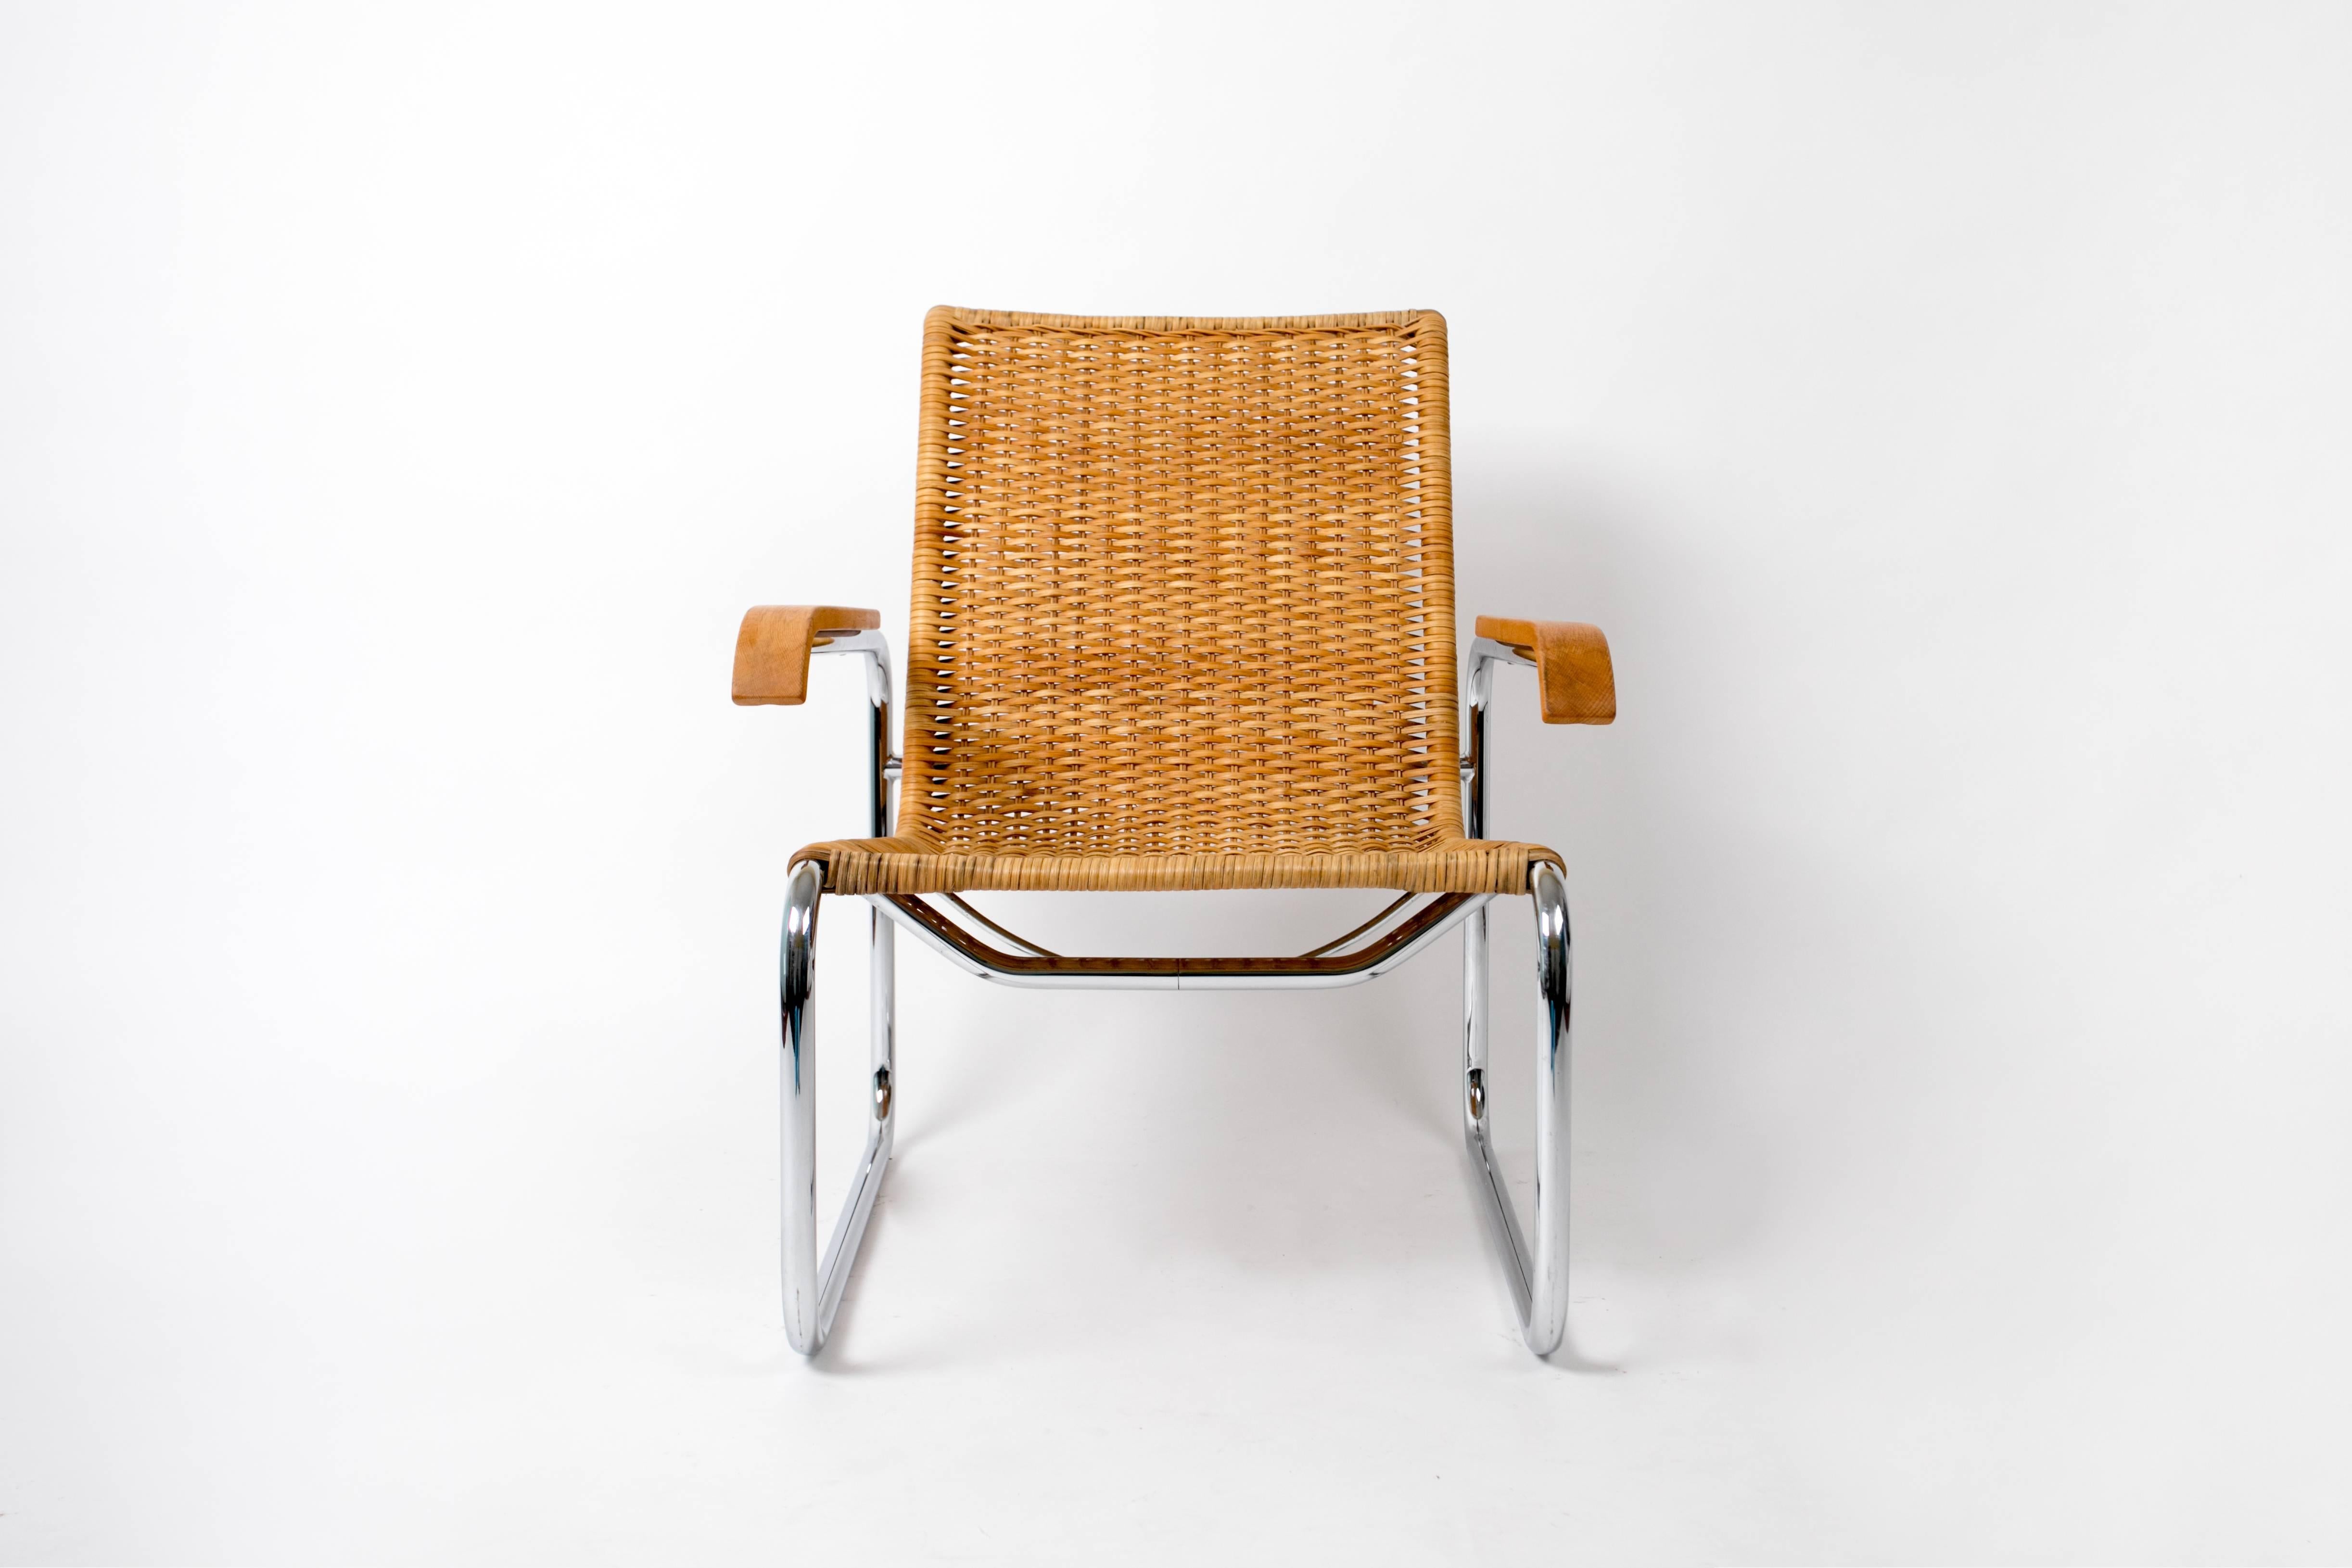 An original Marcel Breuer B35 lounge chair. Designed in 1928 and produced by German manufacturer Thonet, this example has a woven rattan seat. Other variants have included leather cushion or sling upholstery. The seat 'floats' in a chrome frame with